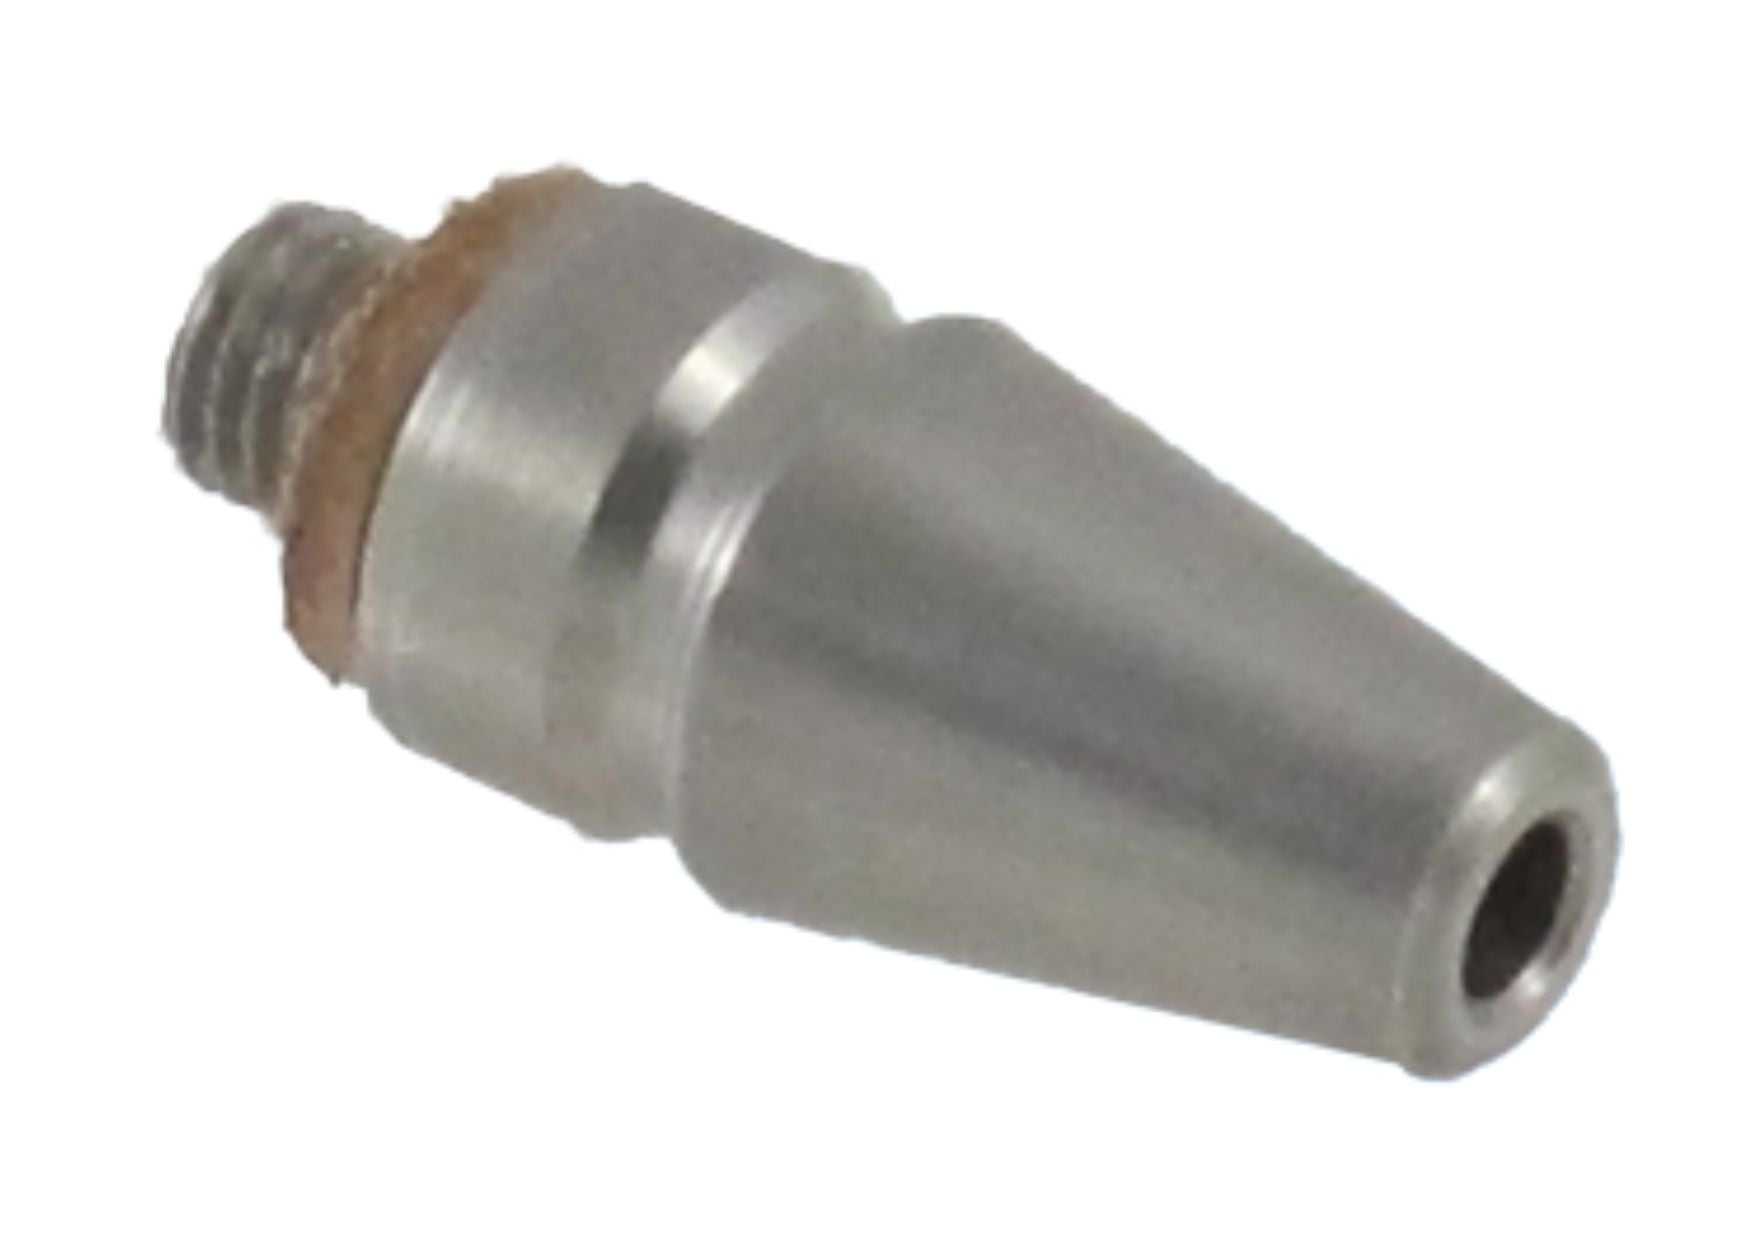 Adapter, hose connector, 12-32 thread, male